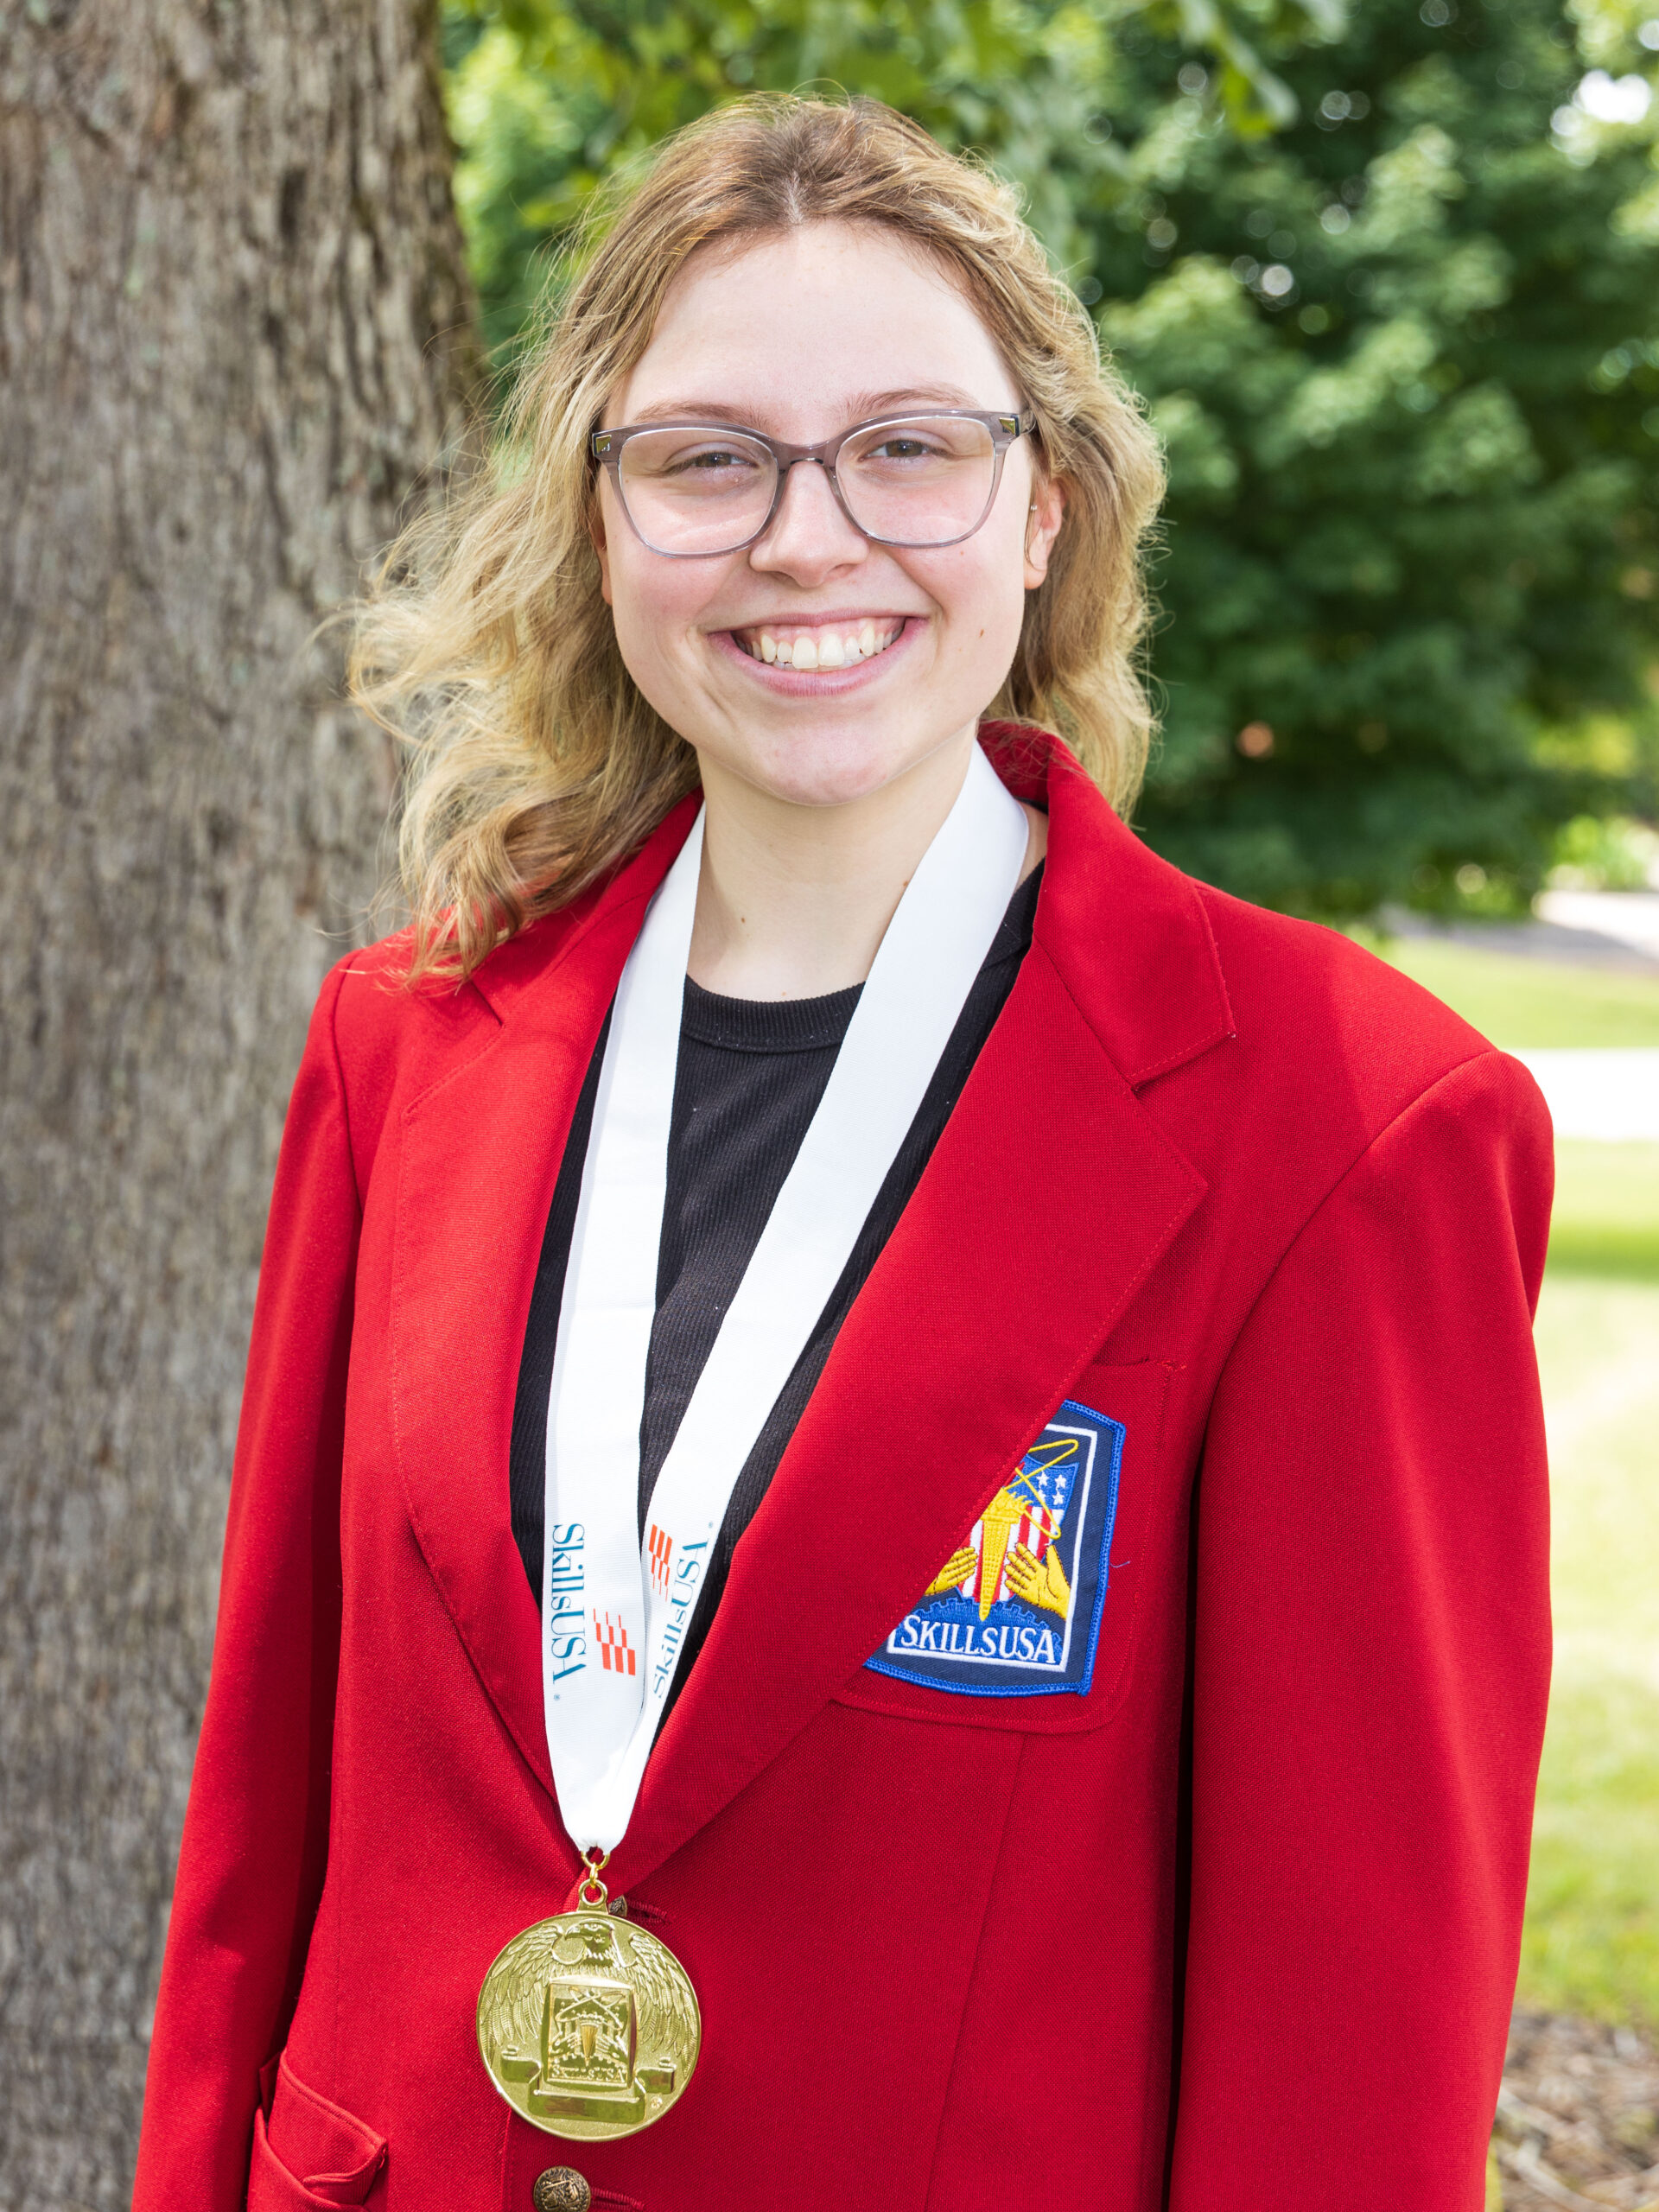 Pictured: Culinary Arts student Hannah Nelson with national SkillsUSA gold medal. 